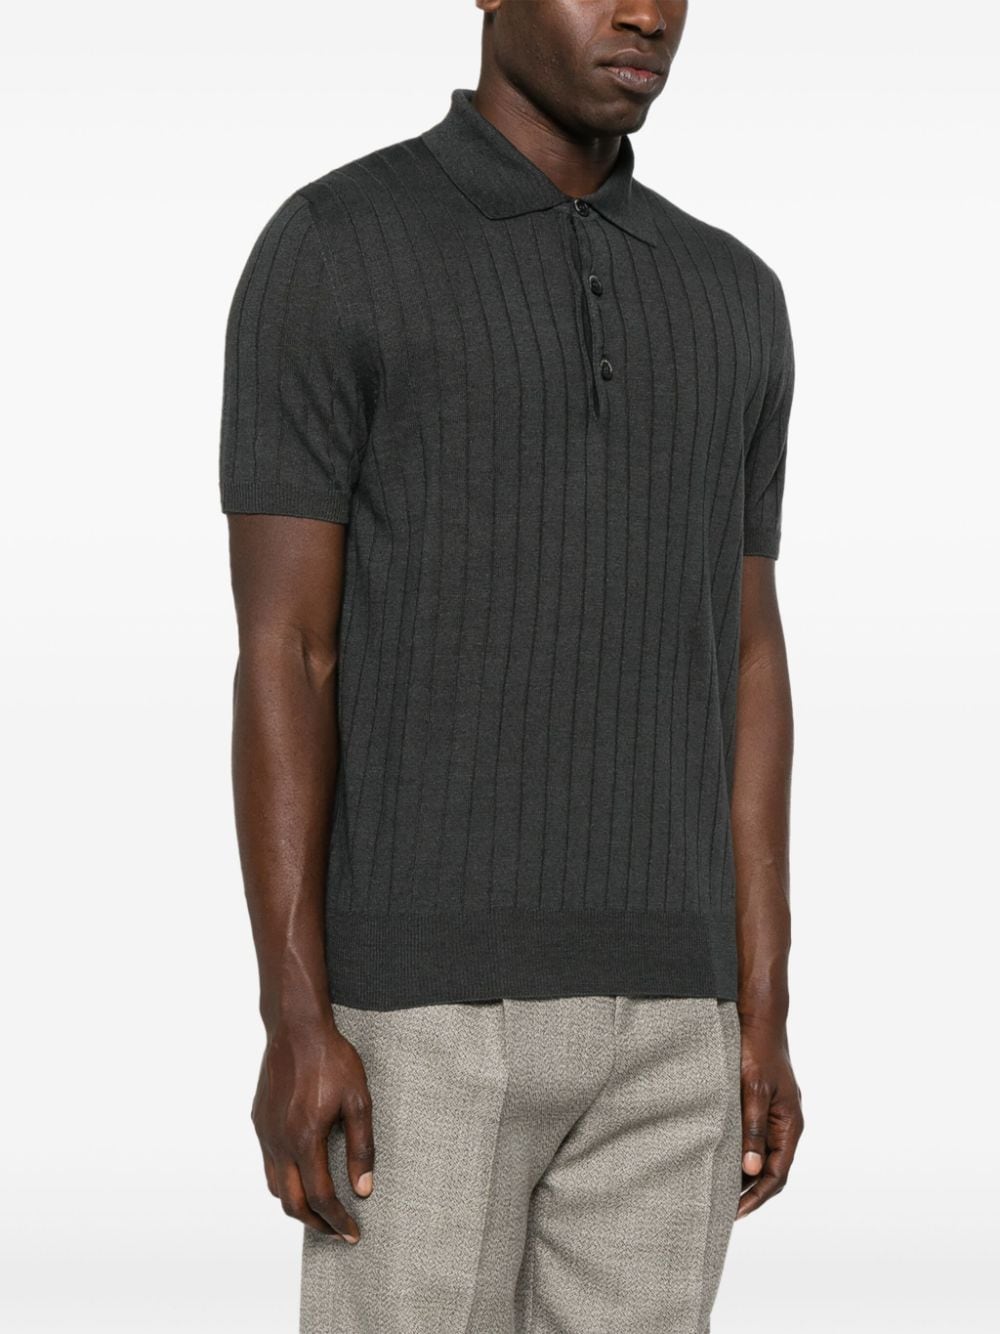 Gray knitted polo shirt